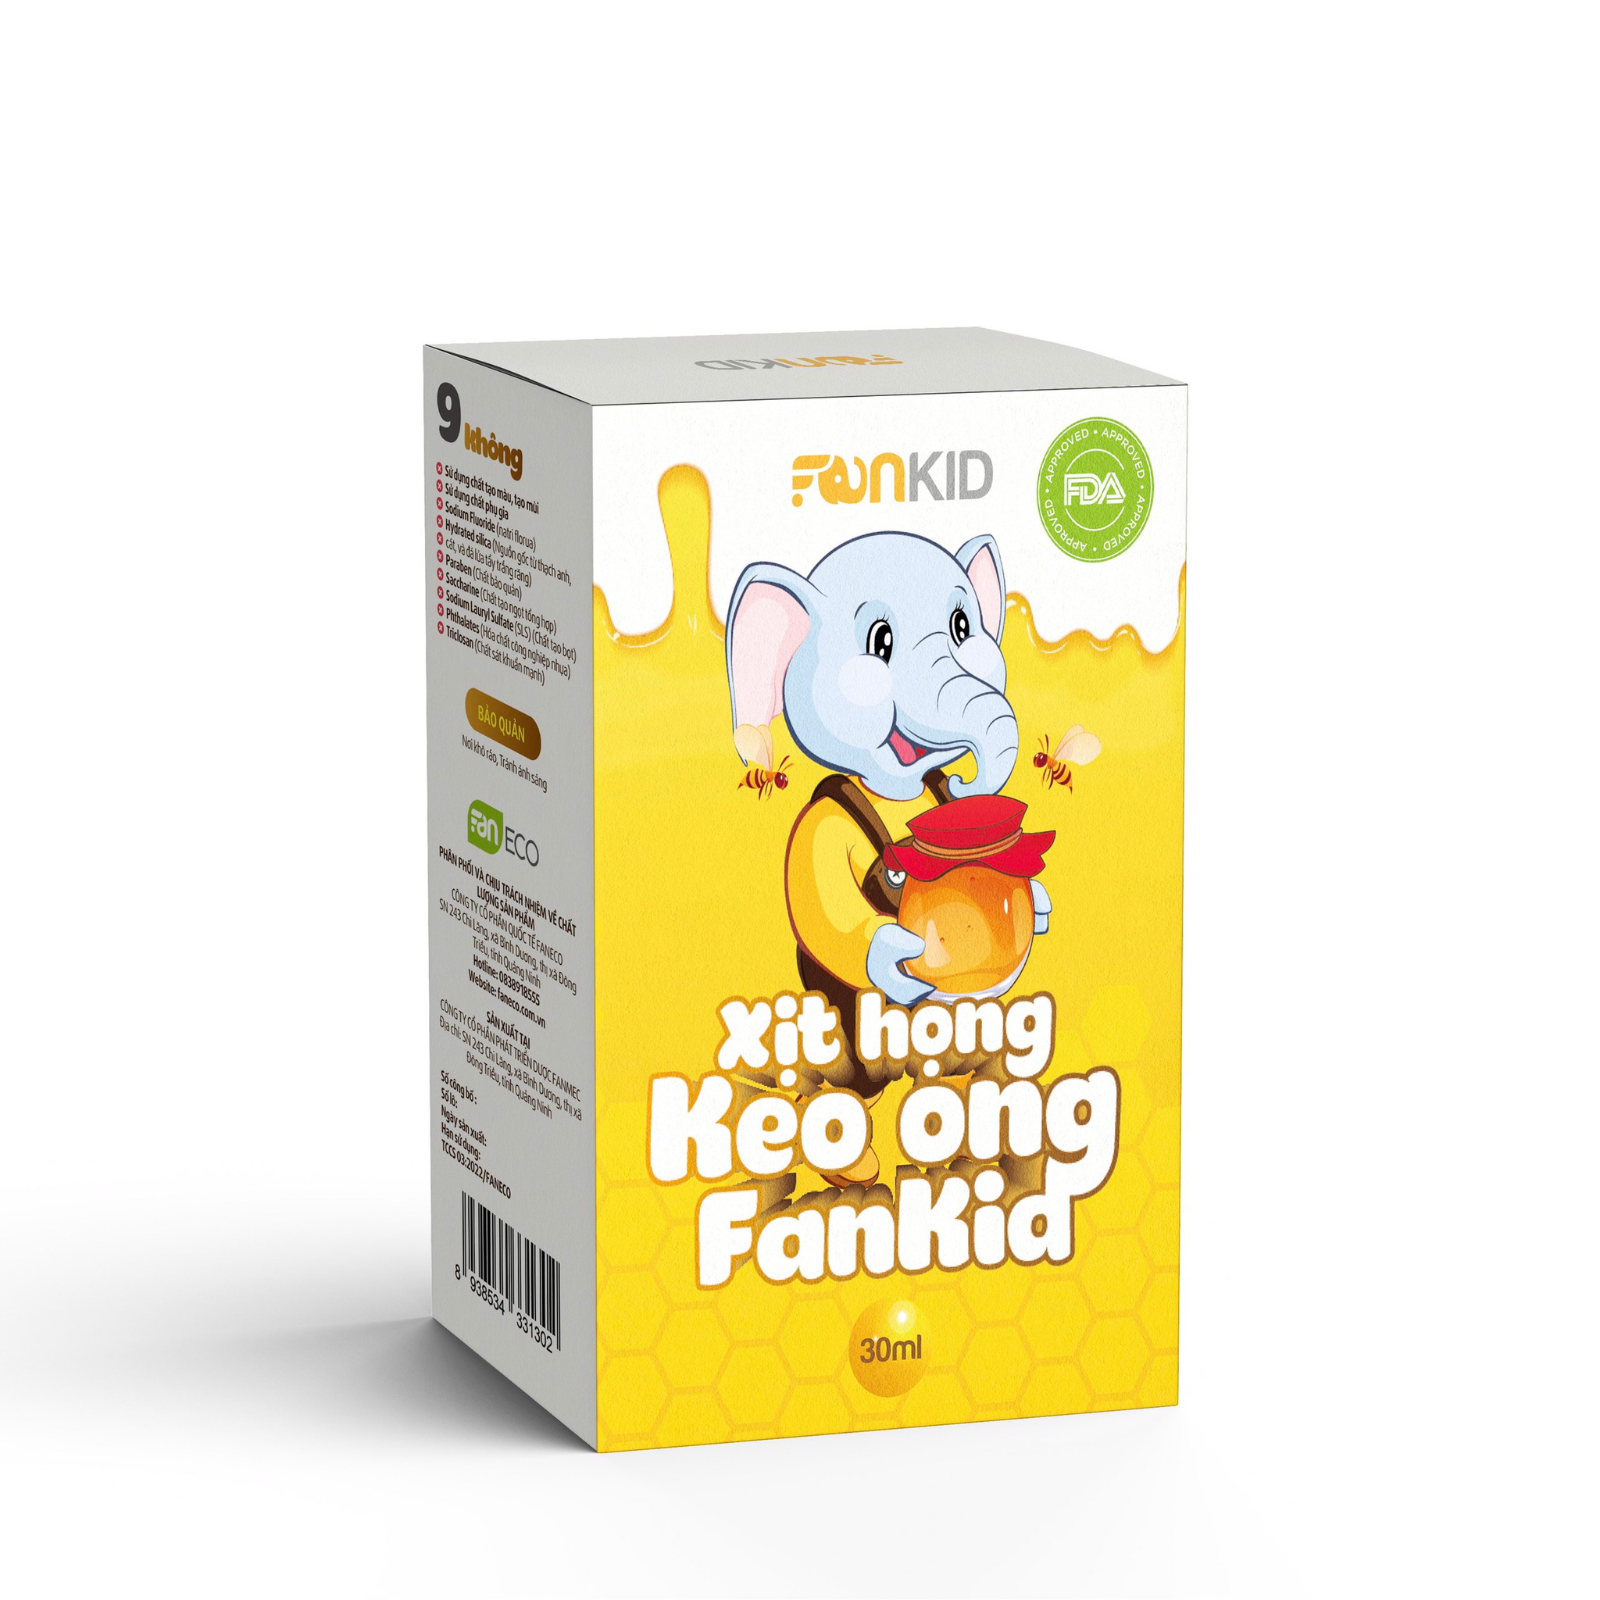 What are the ingredients and benefits of the Fankid xịt họng keo ong product?